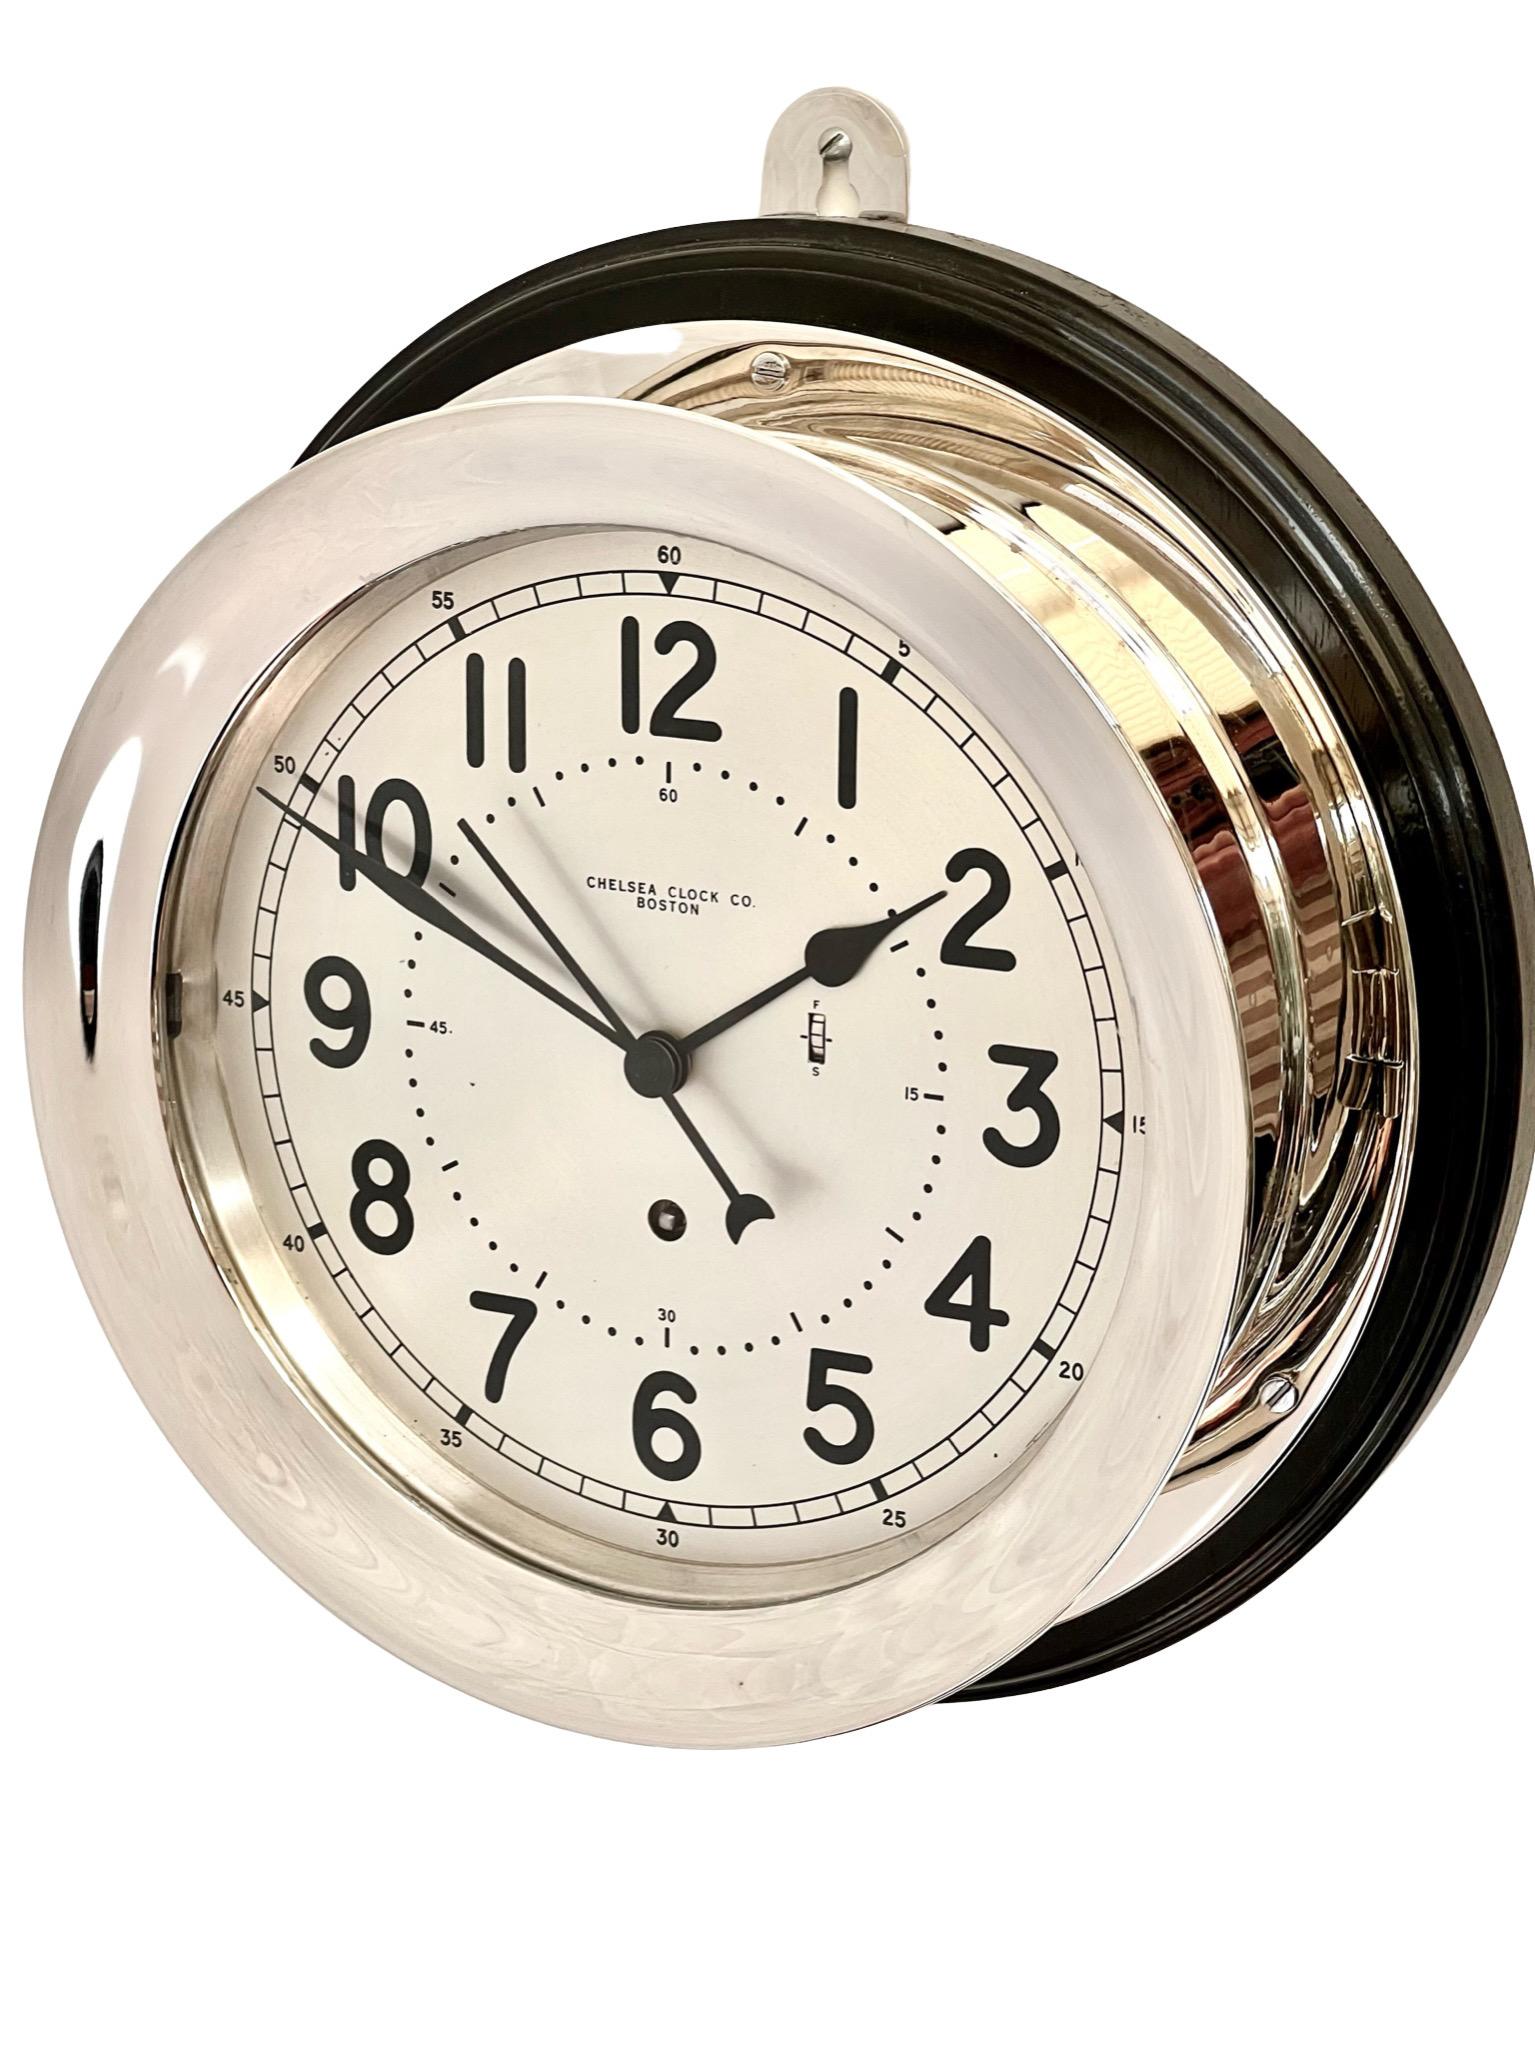 A stunning American large chrome plated timepiece ship’s clock made by Chelsea Clock Company, Boston, USA.
Founded in 1897, Chelsea Clock Company is one of the oldest and largest clock manufacturers in the United States. For over a century,